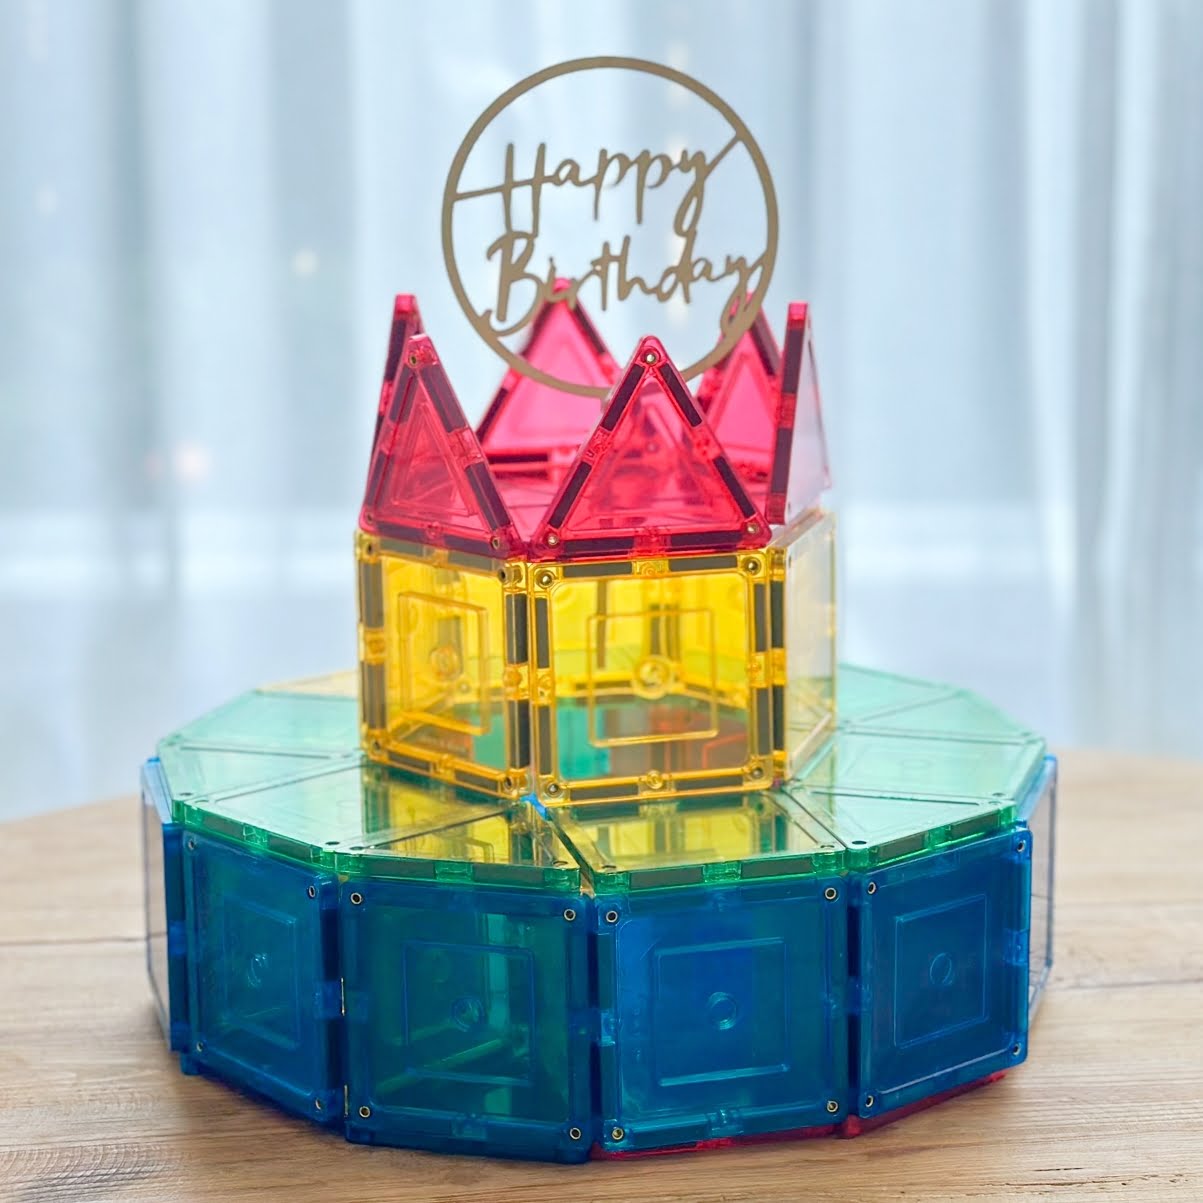 Birthday Cake made out of ABS Food Grade plastic learn and grow tiles